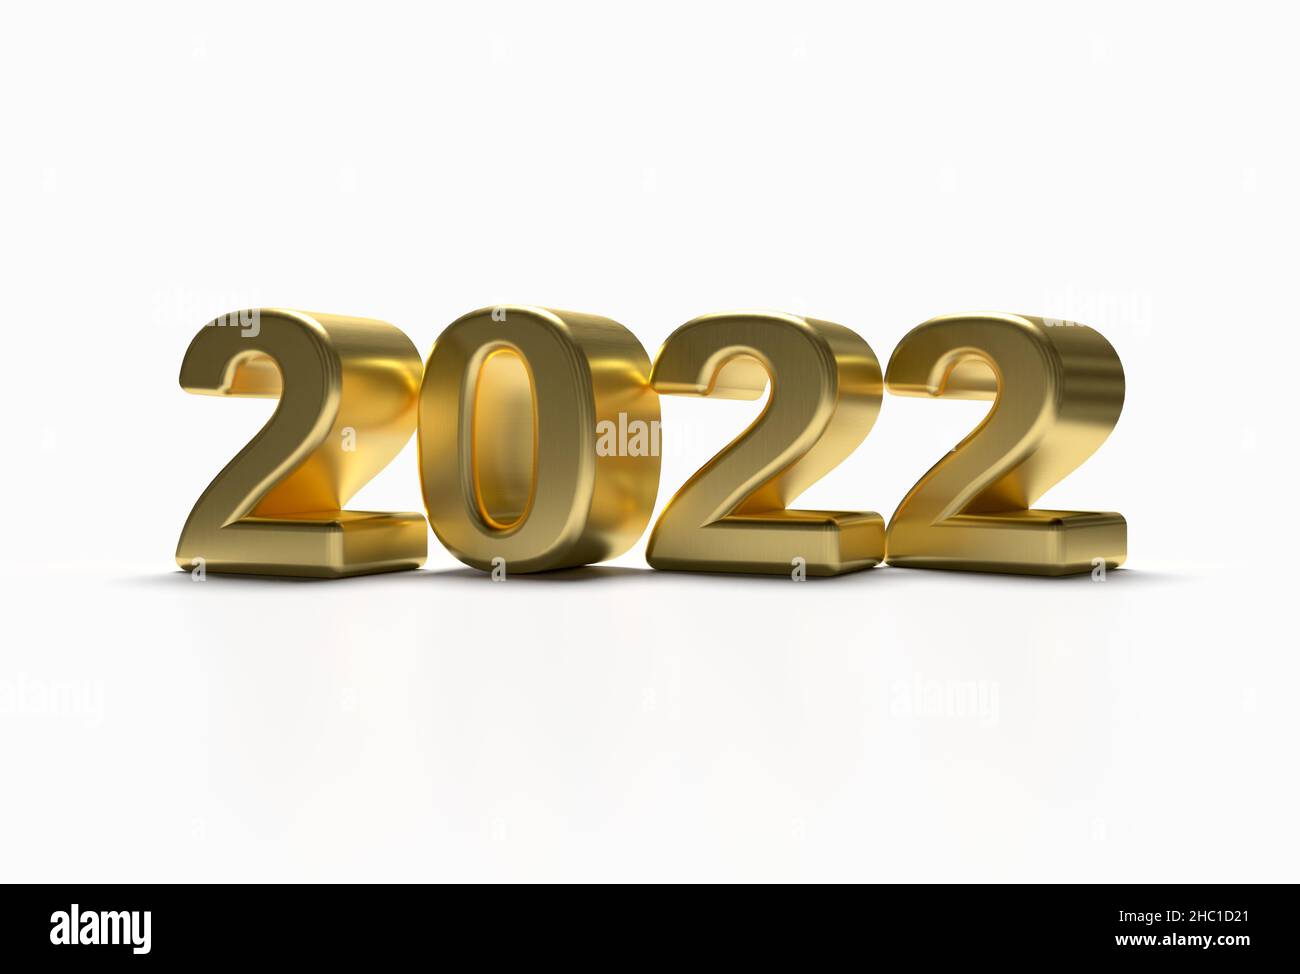 Gold 2022 new year 3d render illustration isolated on white background, Perspective View. Stock Photo